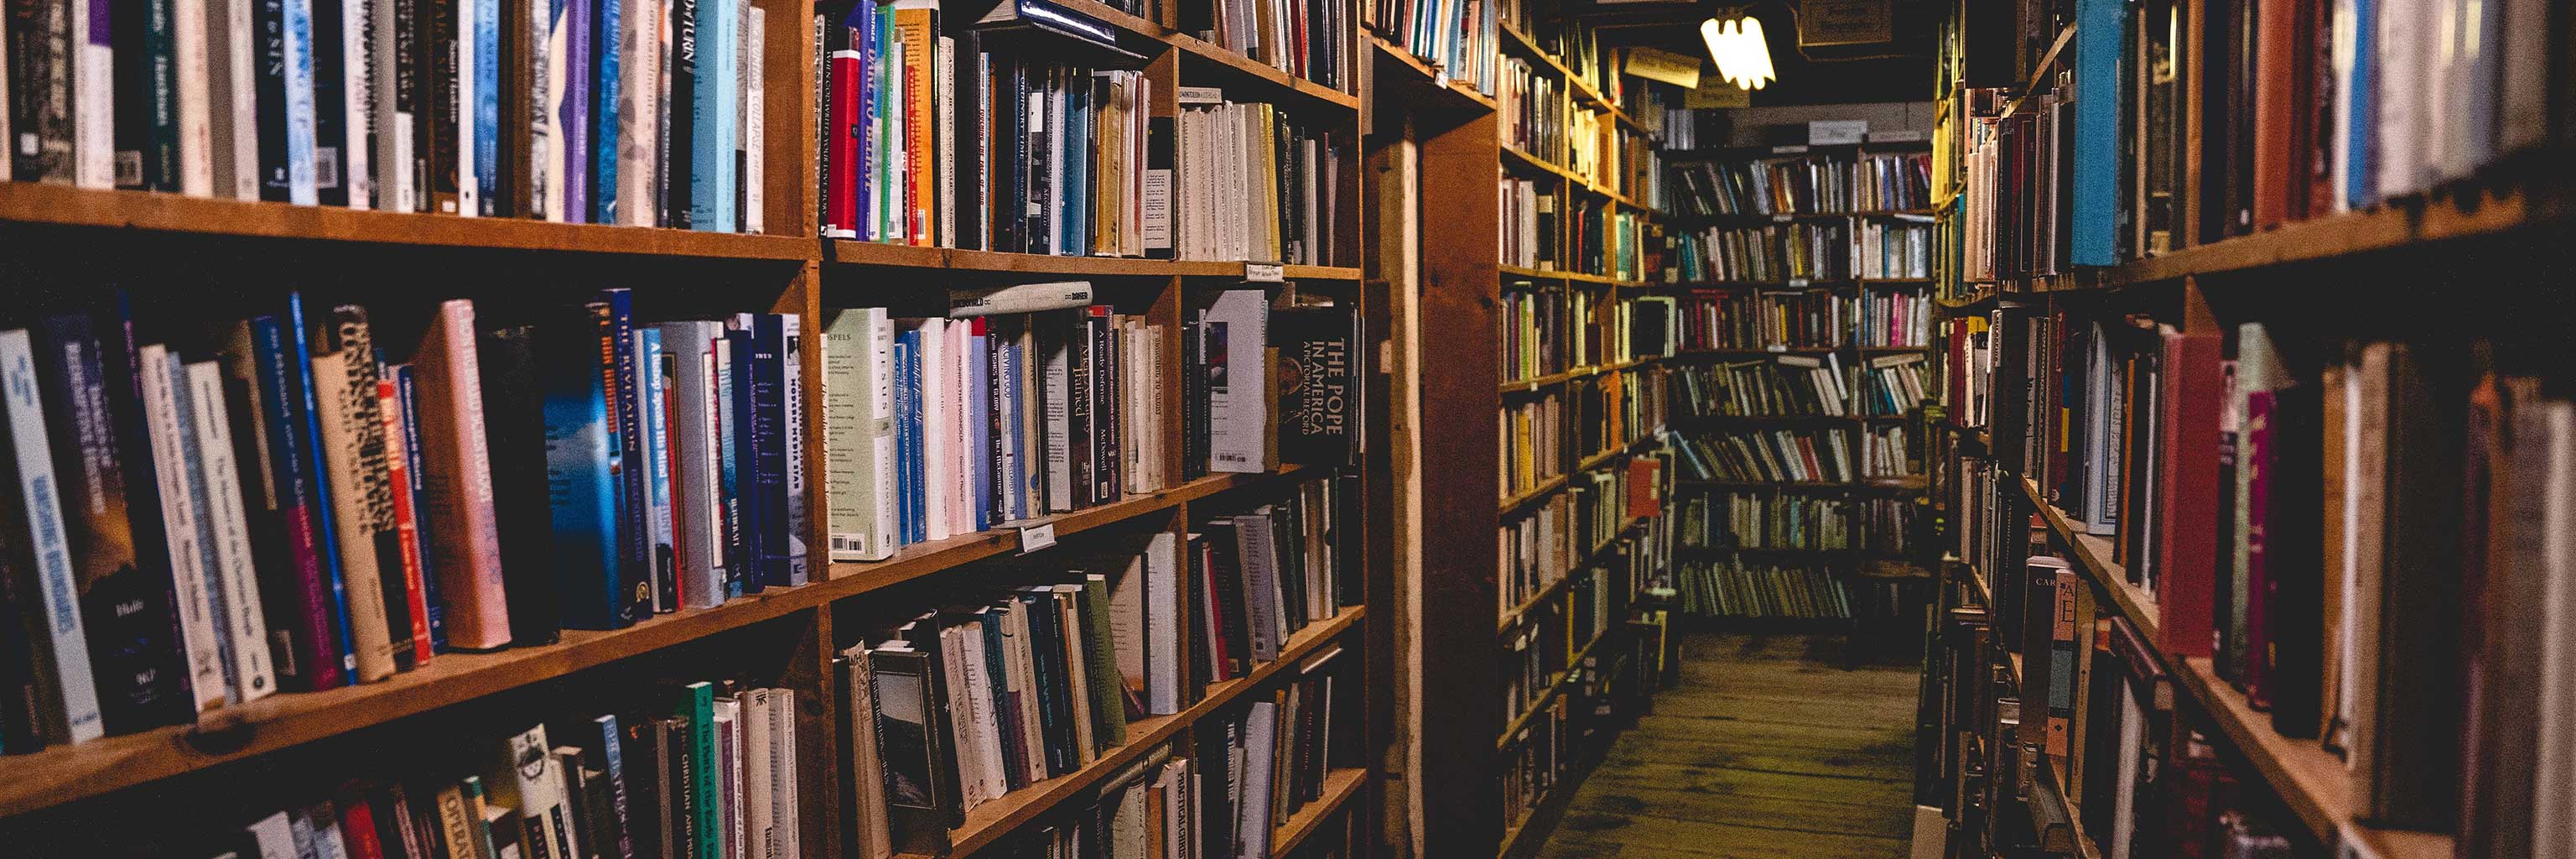 A bookstore's shelves, crowded with books and dimly lit.